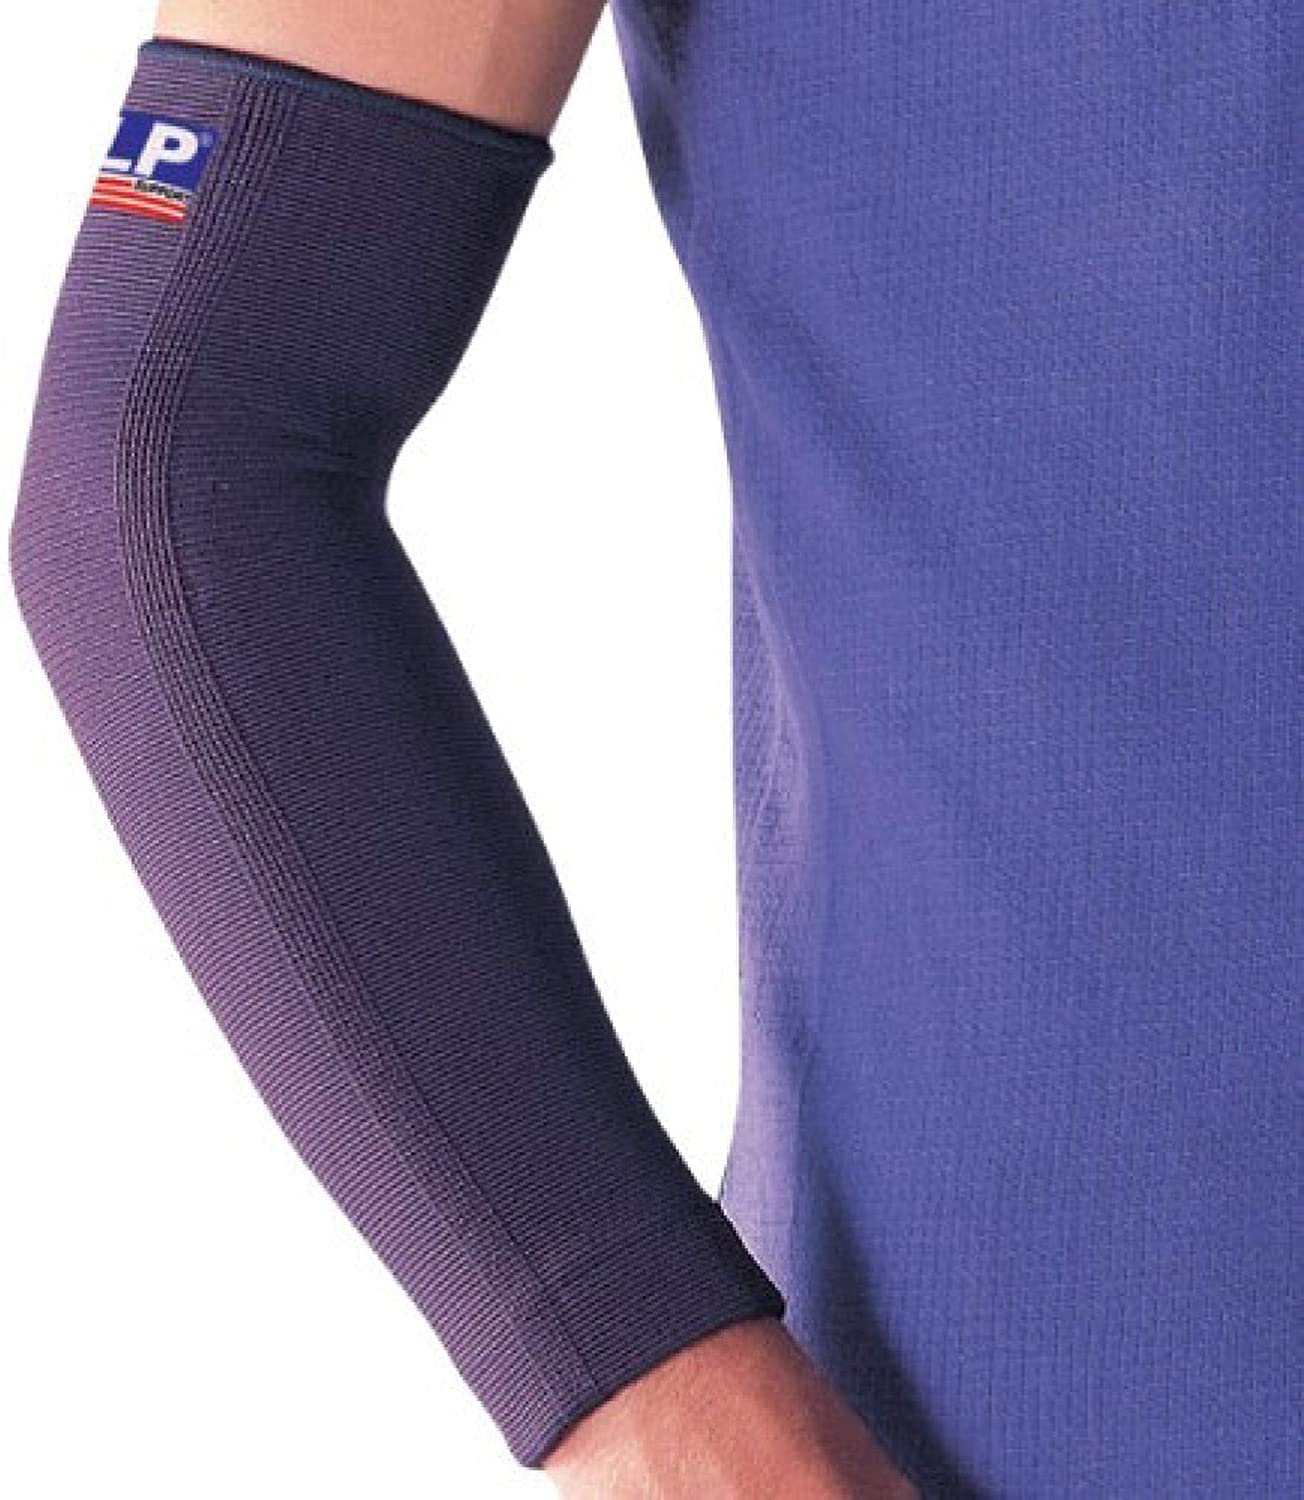 elbow compression sleeve